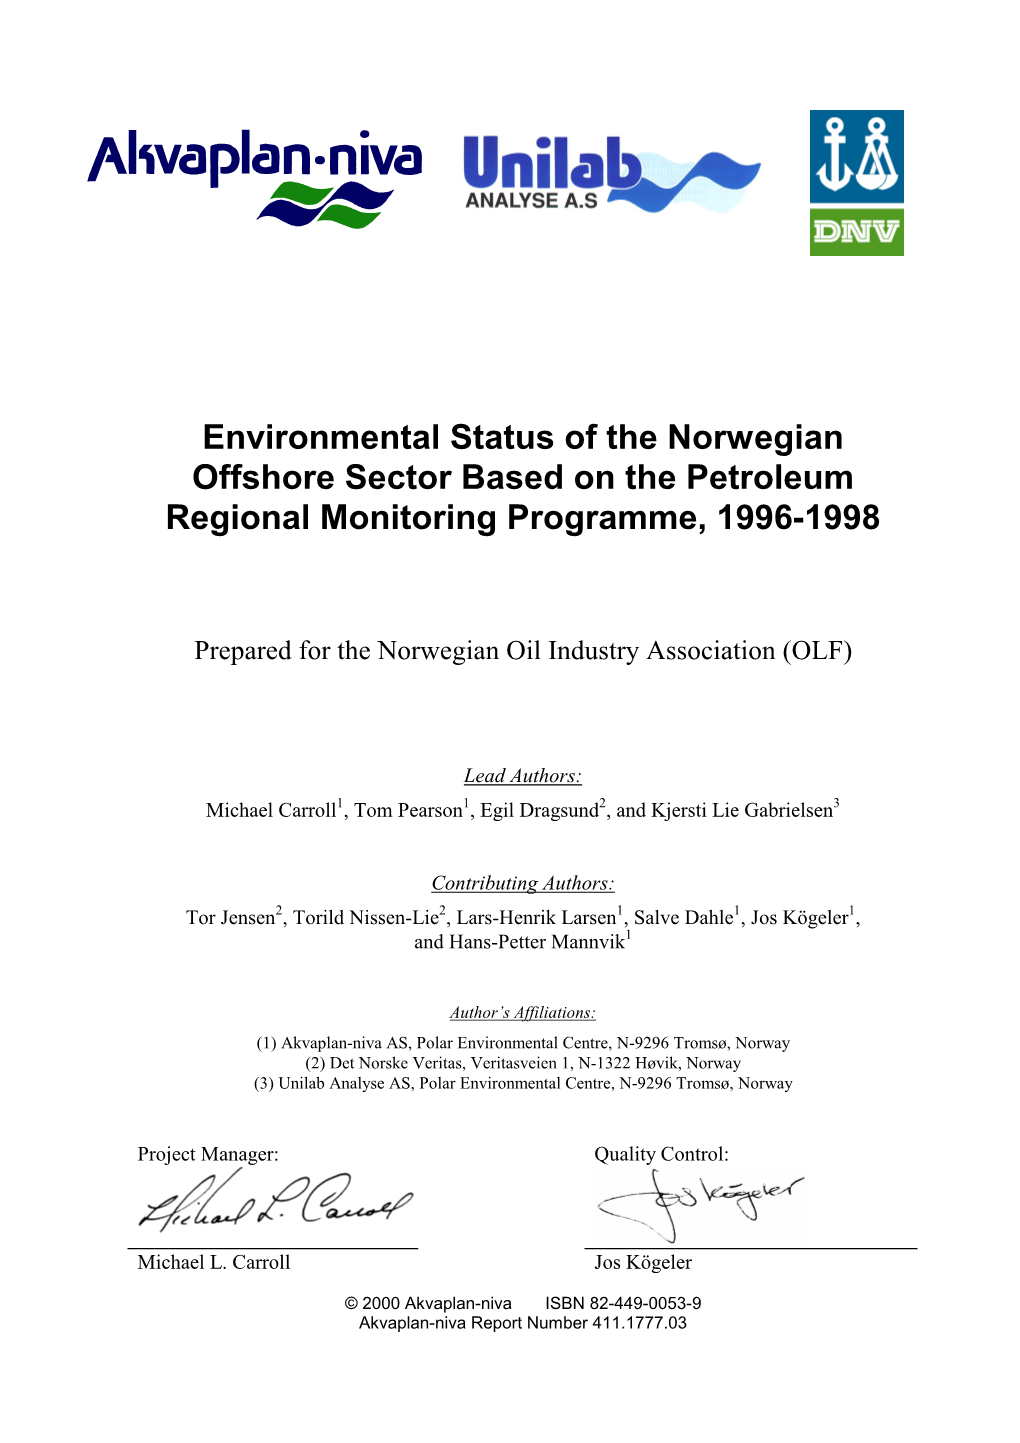 Environmental Status of the Norwegian Offshore Sector Based on the Petroleum Regional Monitoring Programme, 1996-1998